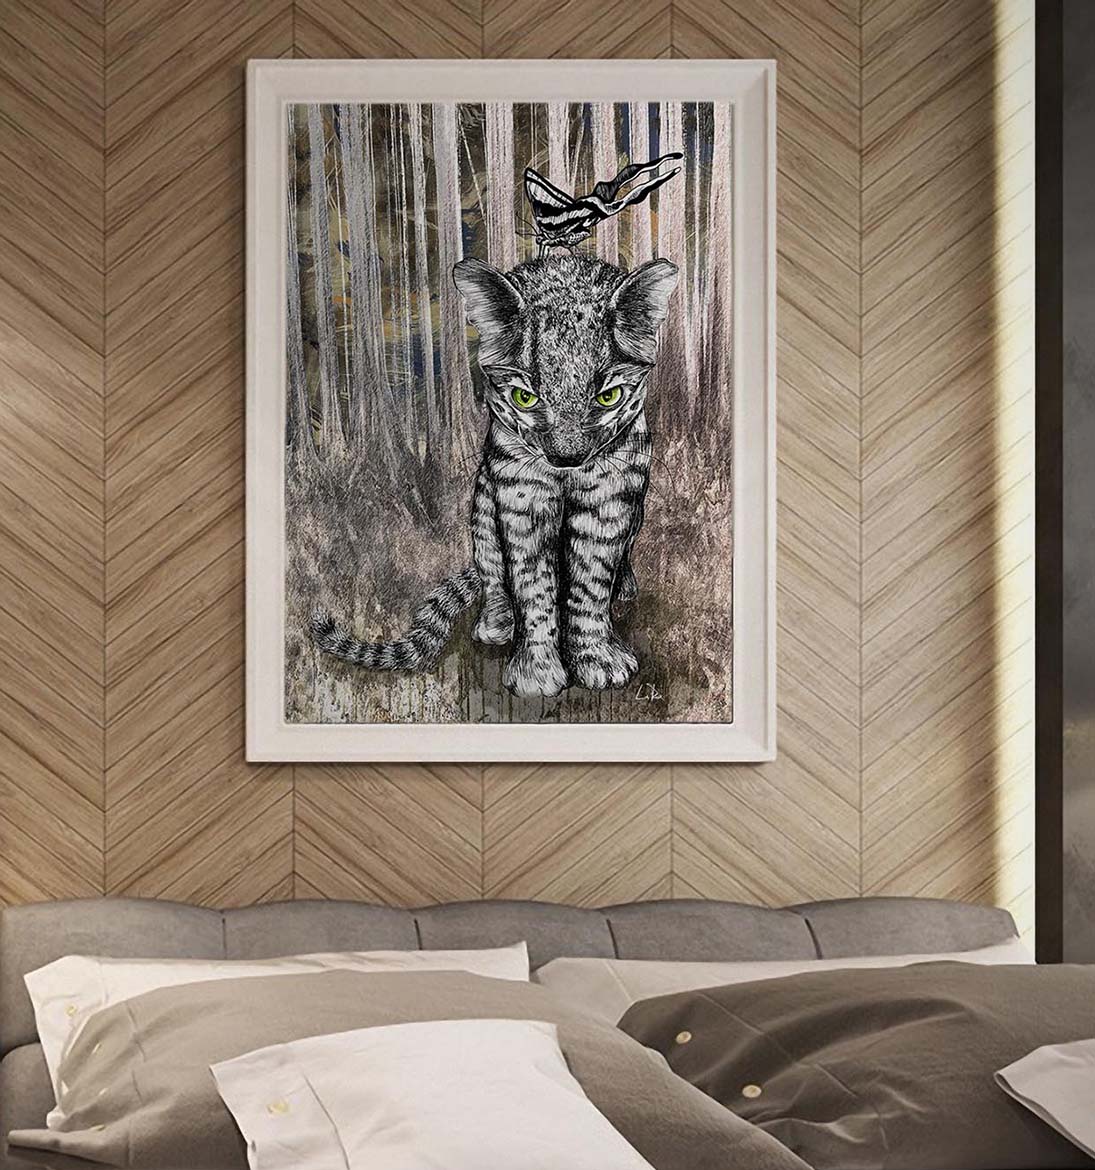 Jungle Kitty and Butterfly mixed media art by Doug LaRue on a bedroom wall